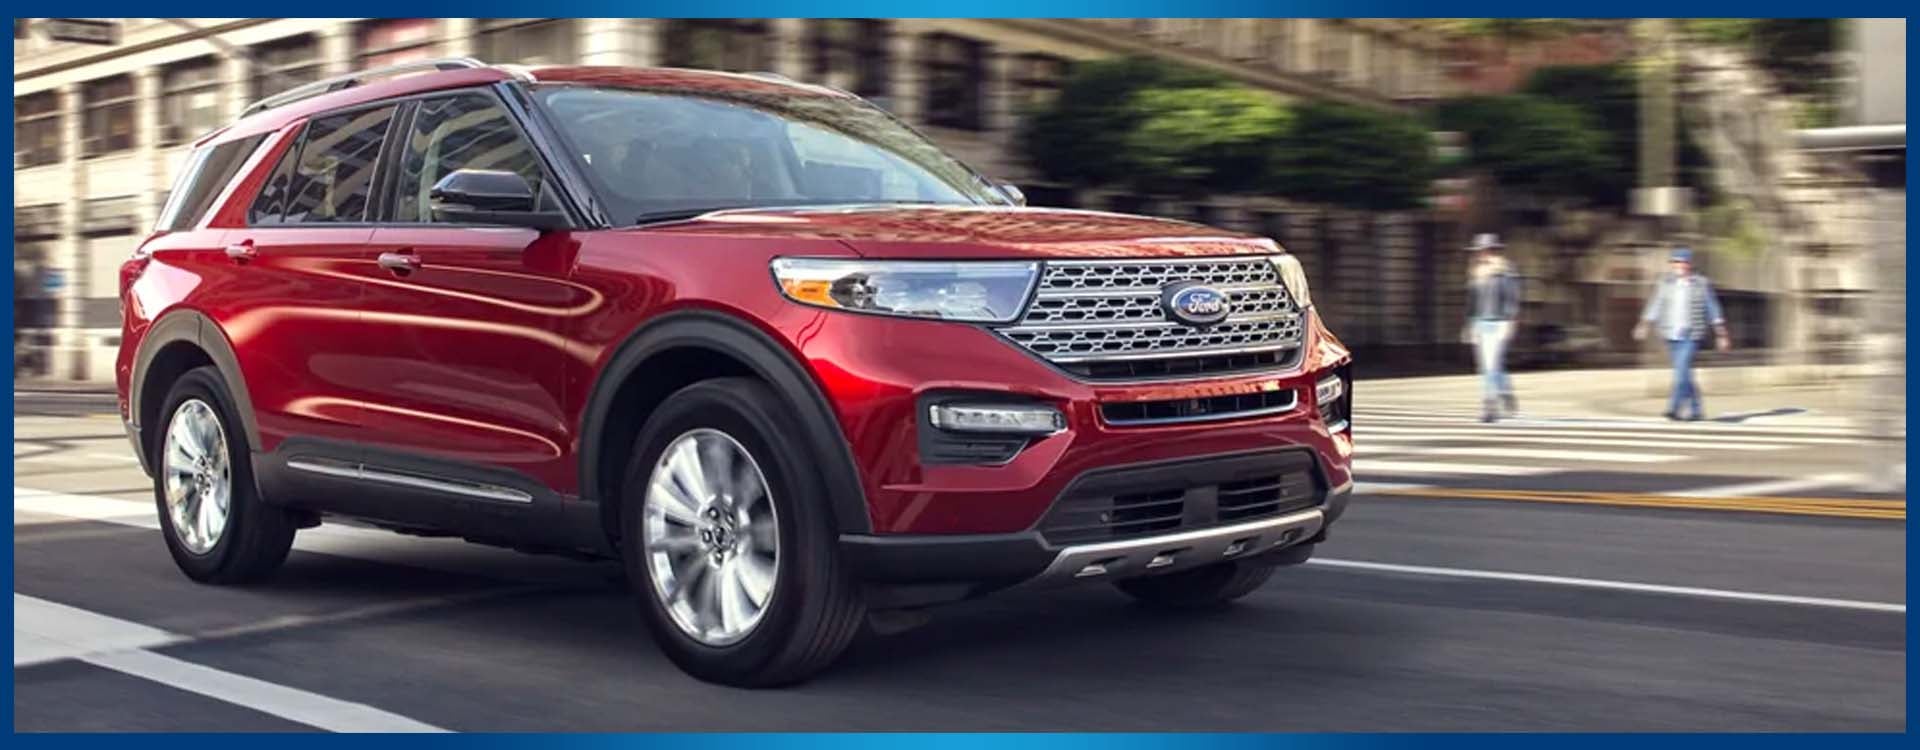 2021 Ford Explorer Towing Package